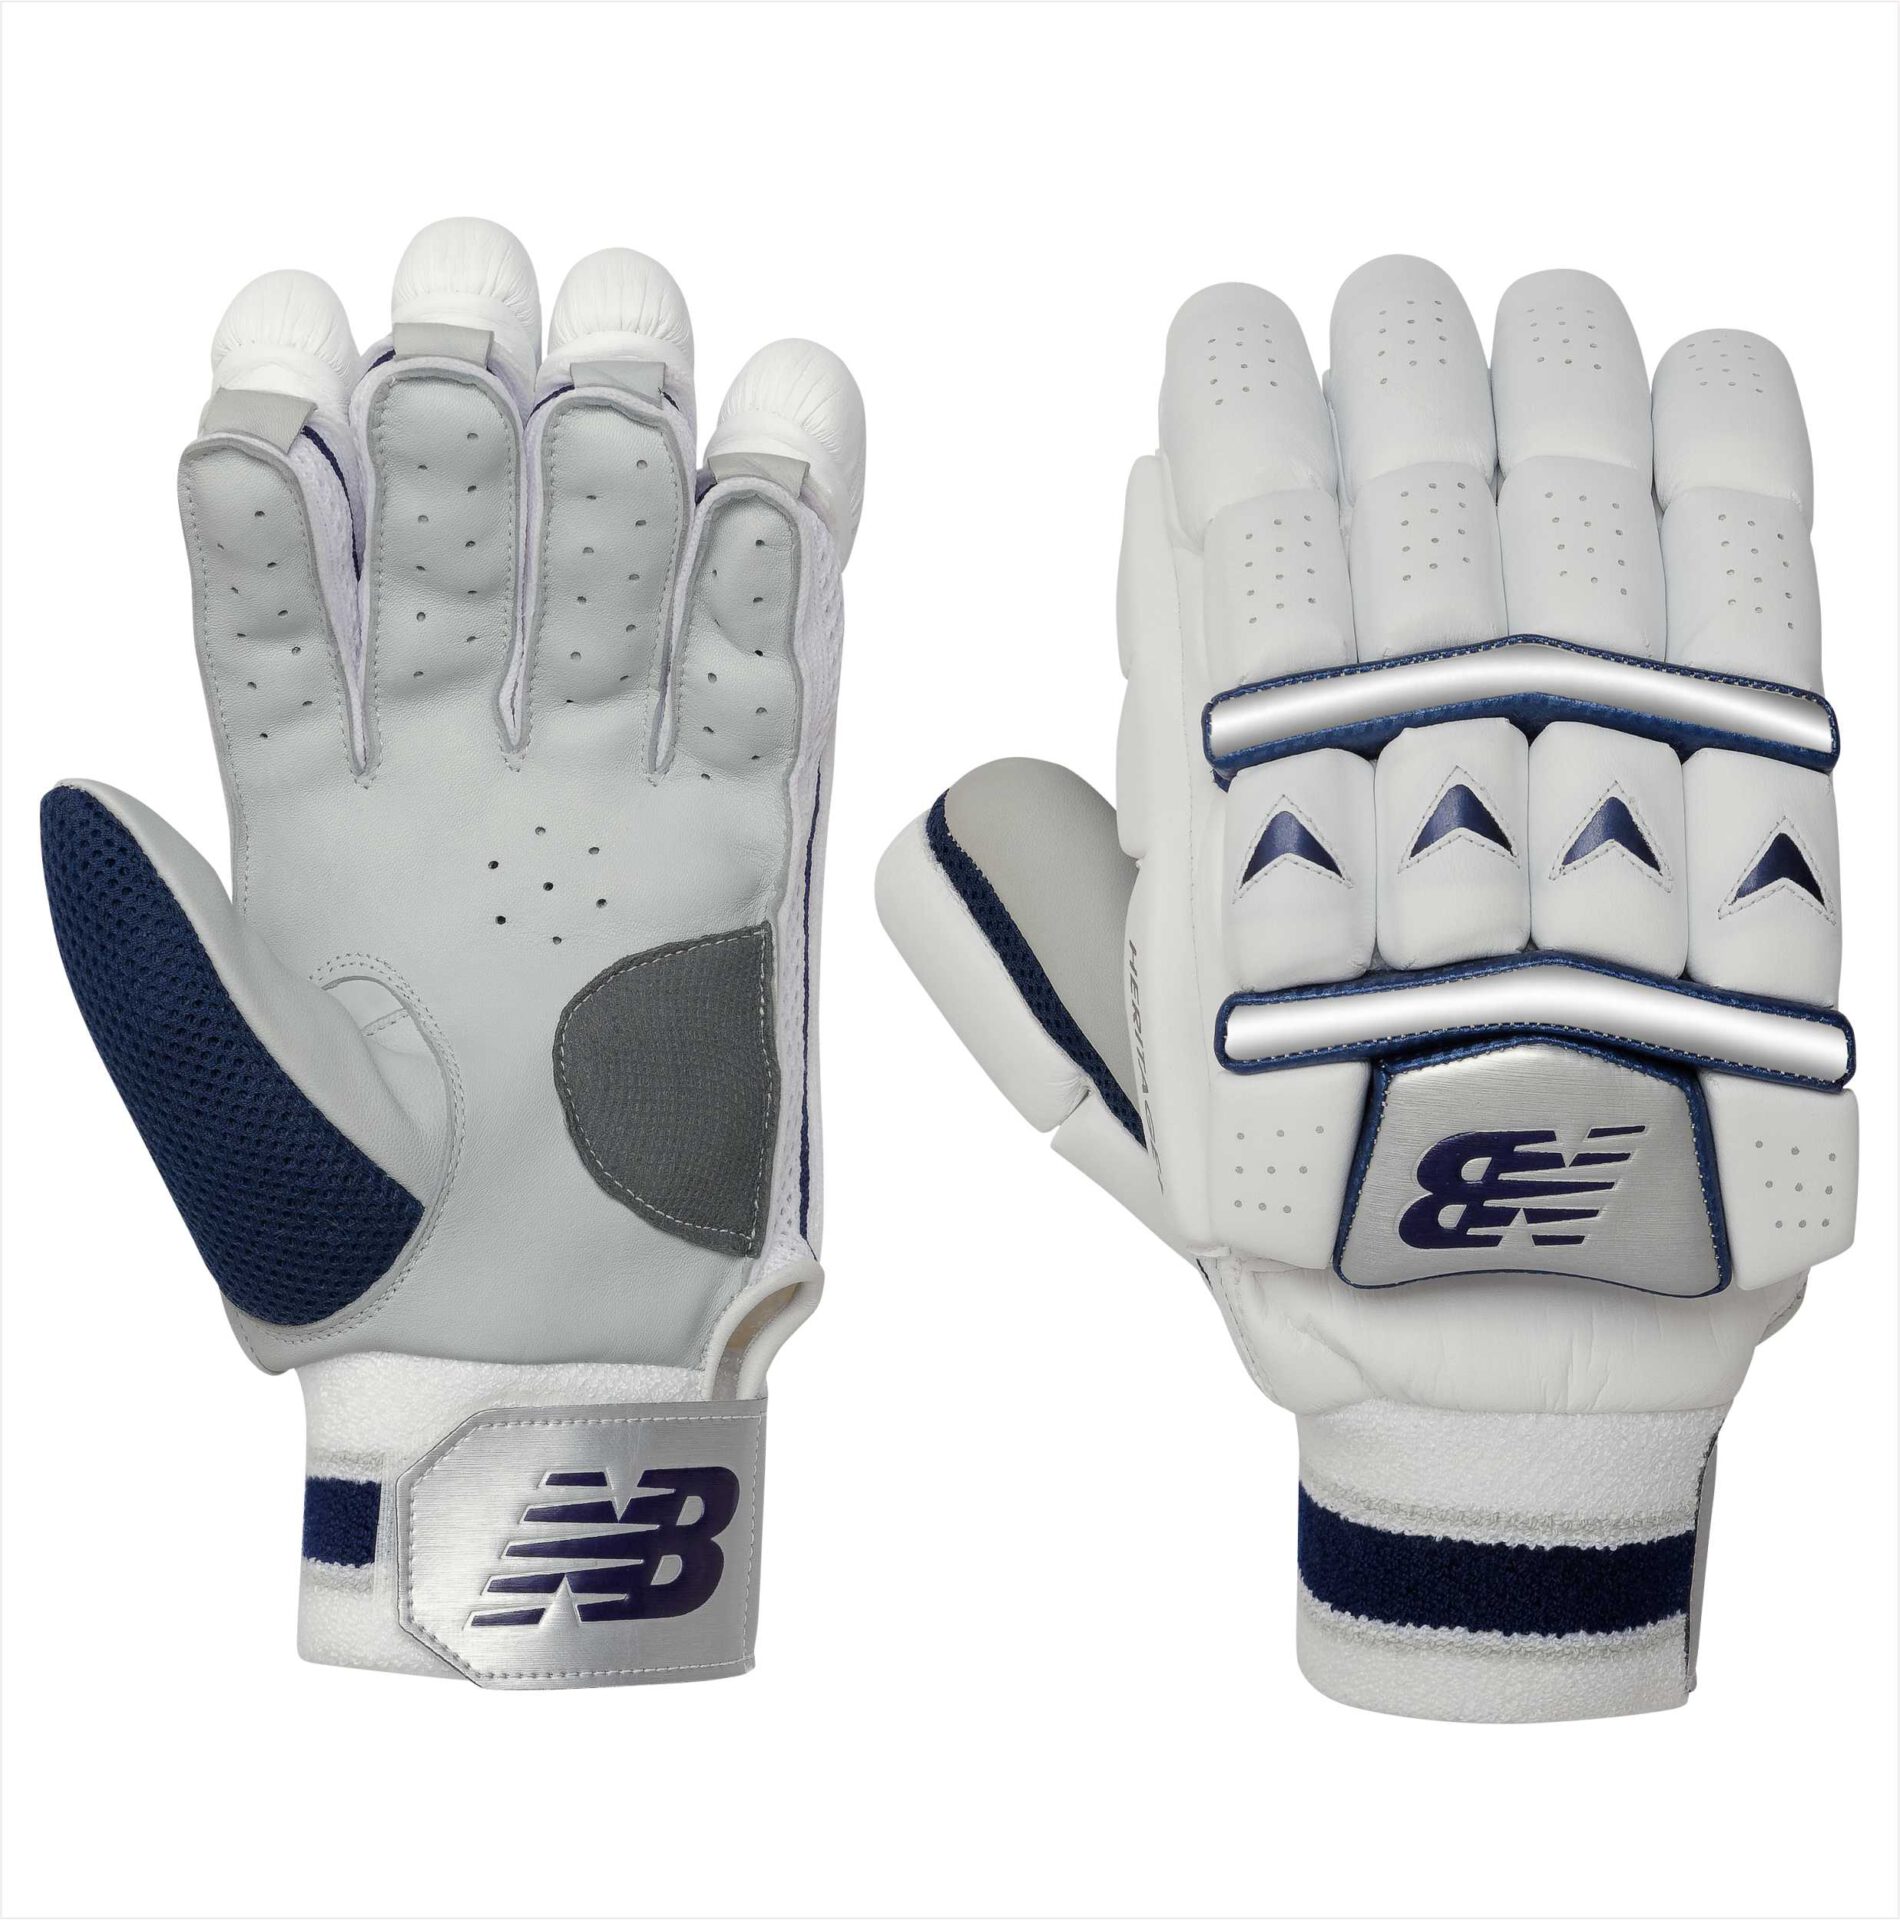 NB Batting Gloves Adult Size with Free Inners Free Postage 